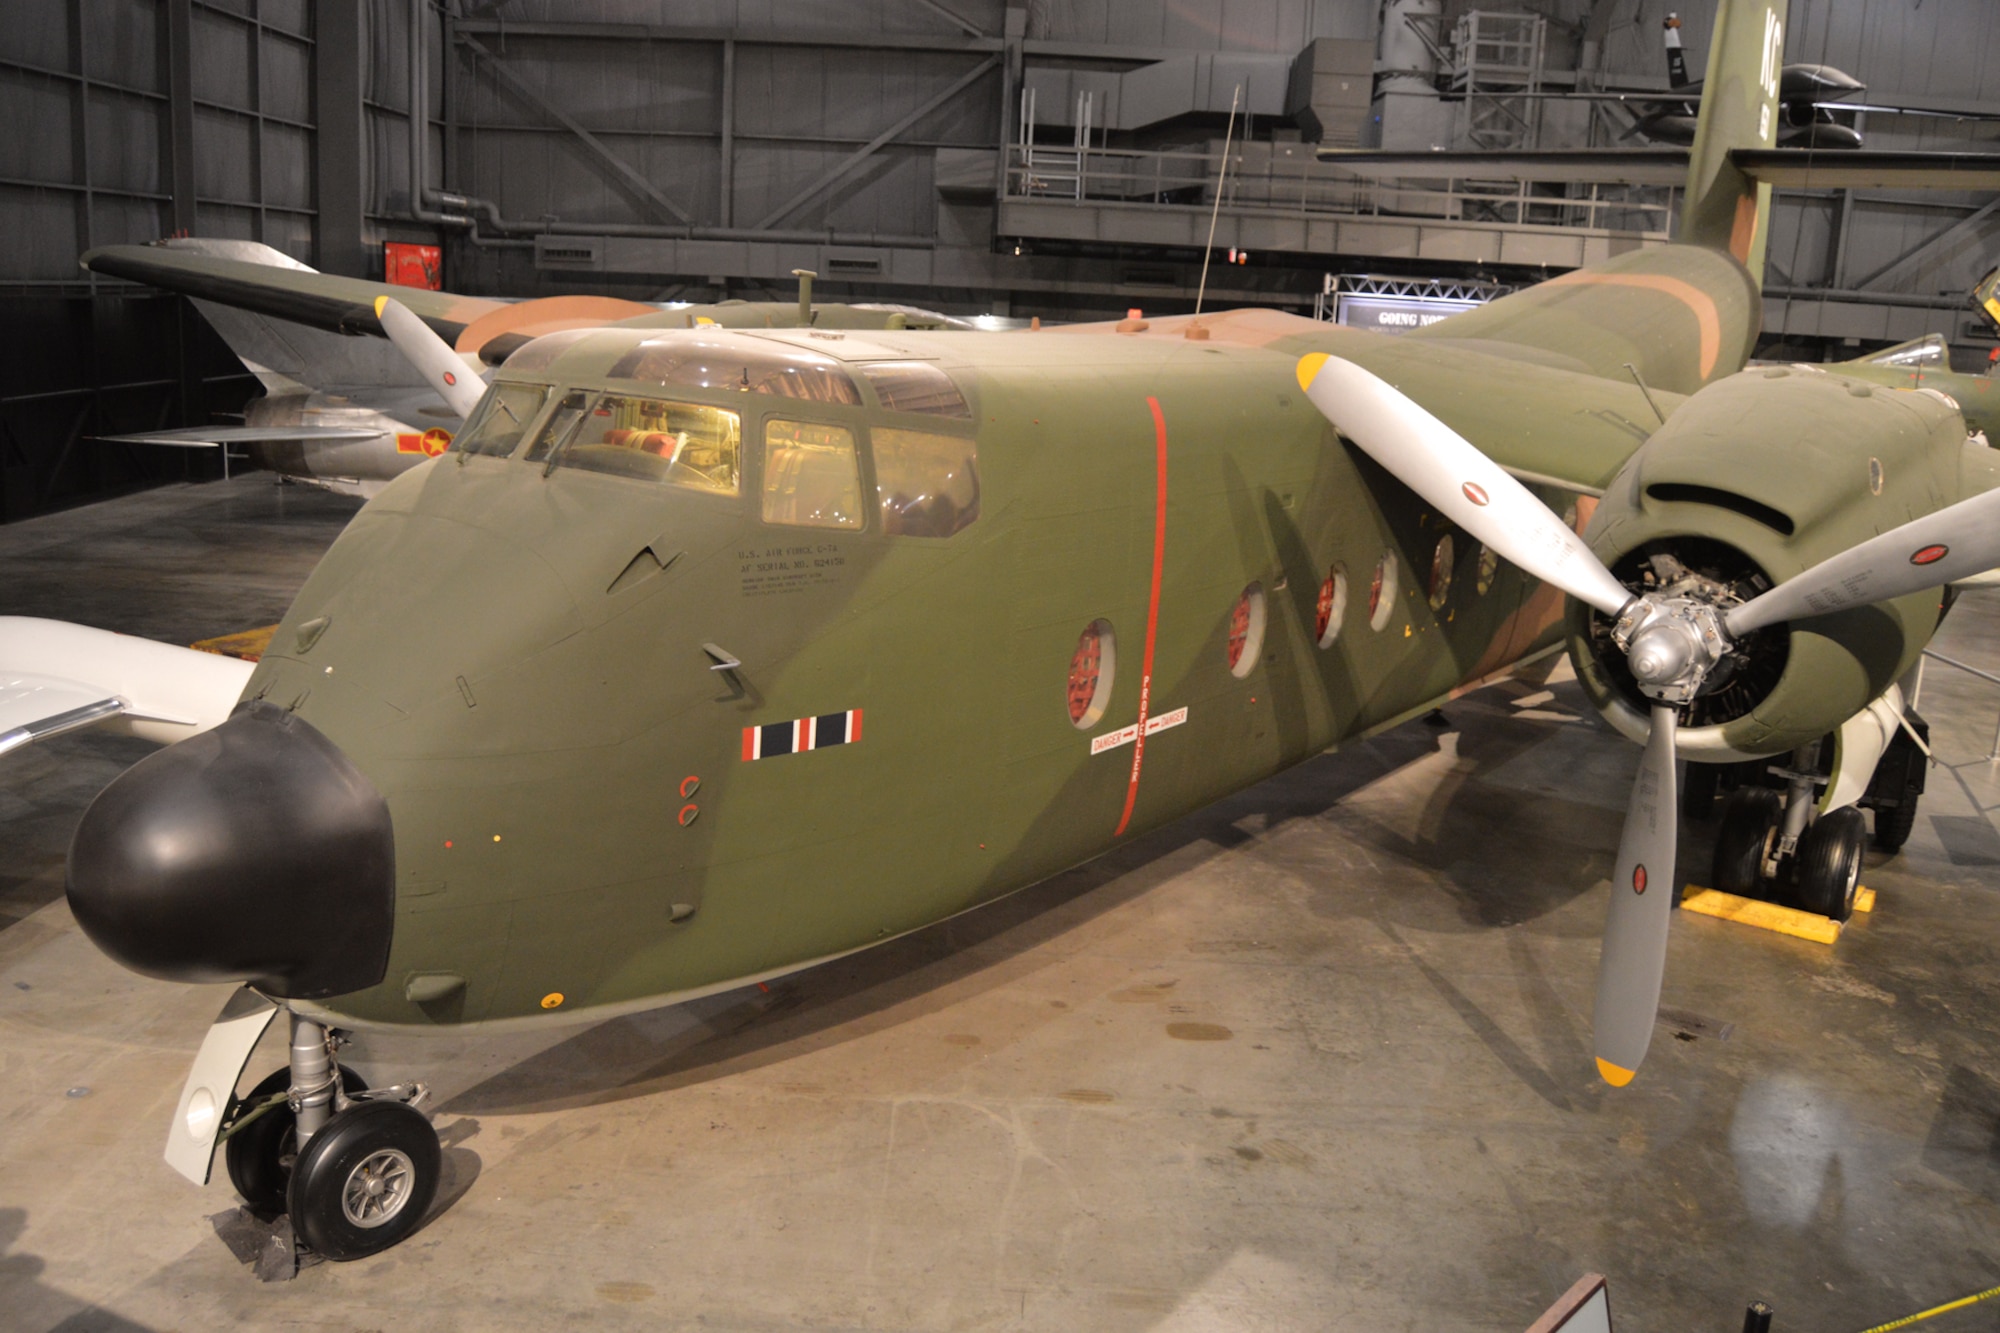 DAYTON, Ohio -- De Havilland C-7A Caribou in the Southeast Asia War Gallery at the National Museum of the United States Air Force. (U.S. Air Force photo)